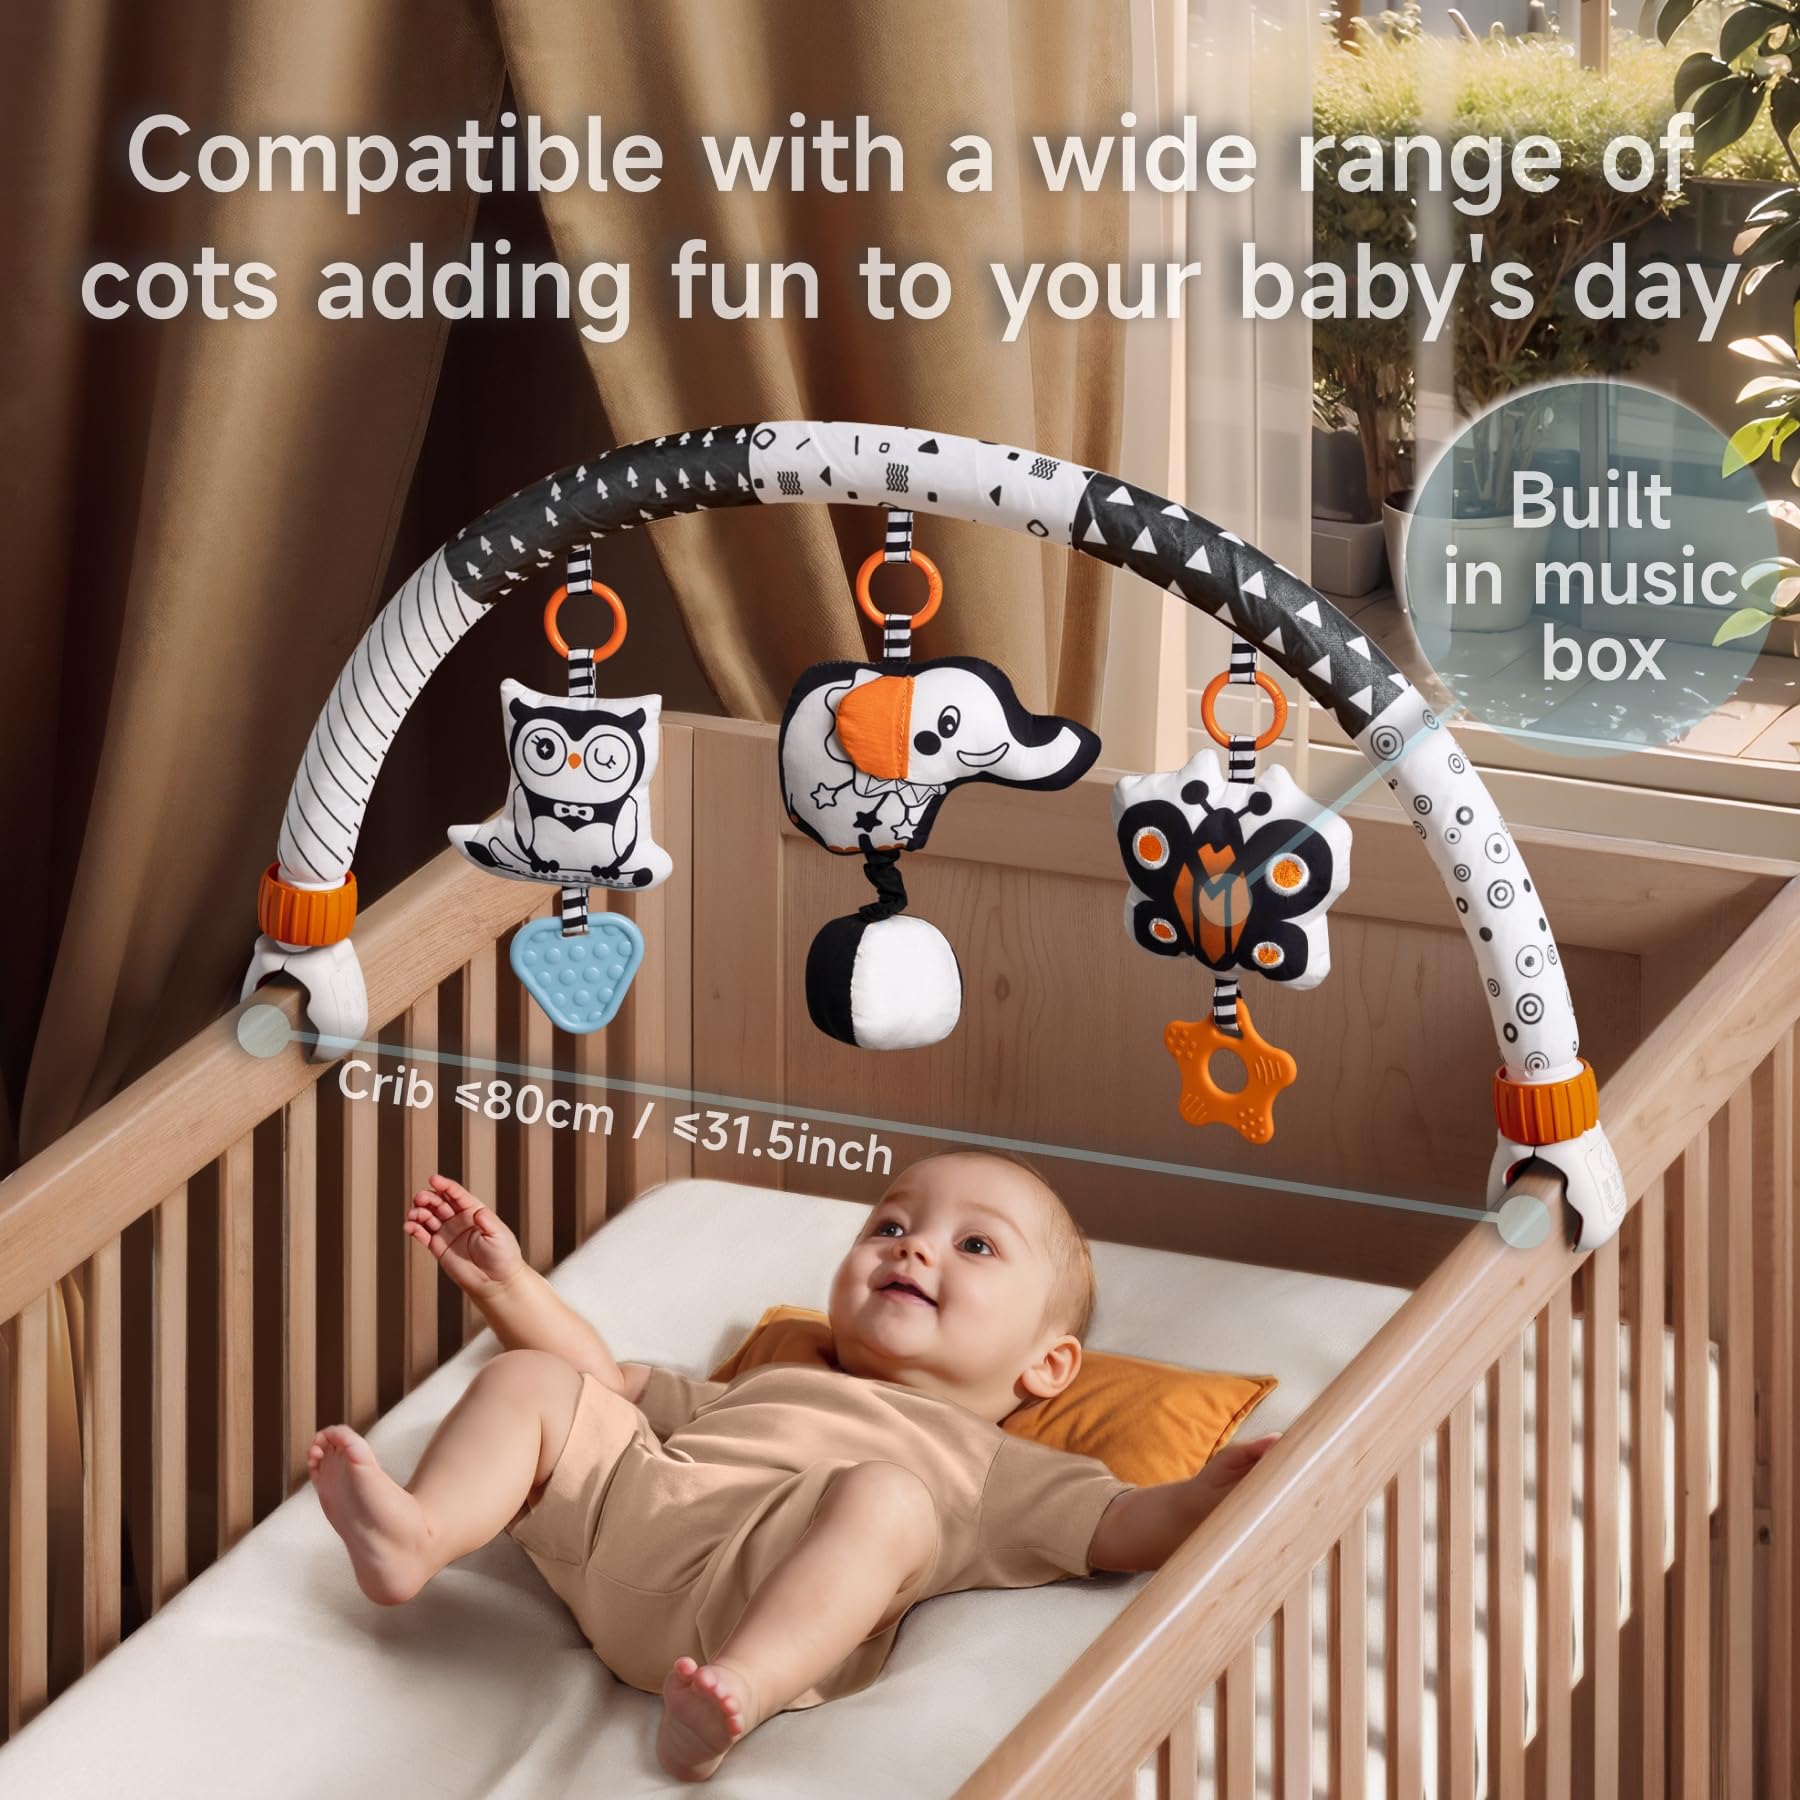 TUMAMA Car Seat Toys for Babies 0-6 Months, Stroller Toys for Infant 0-6 Months, Newborn Sensory Hanging Rattle Arch Toy with Butterfly Elephant Owls,Musical Toy for Baby 6-12 Months